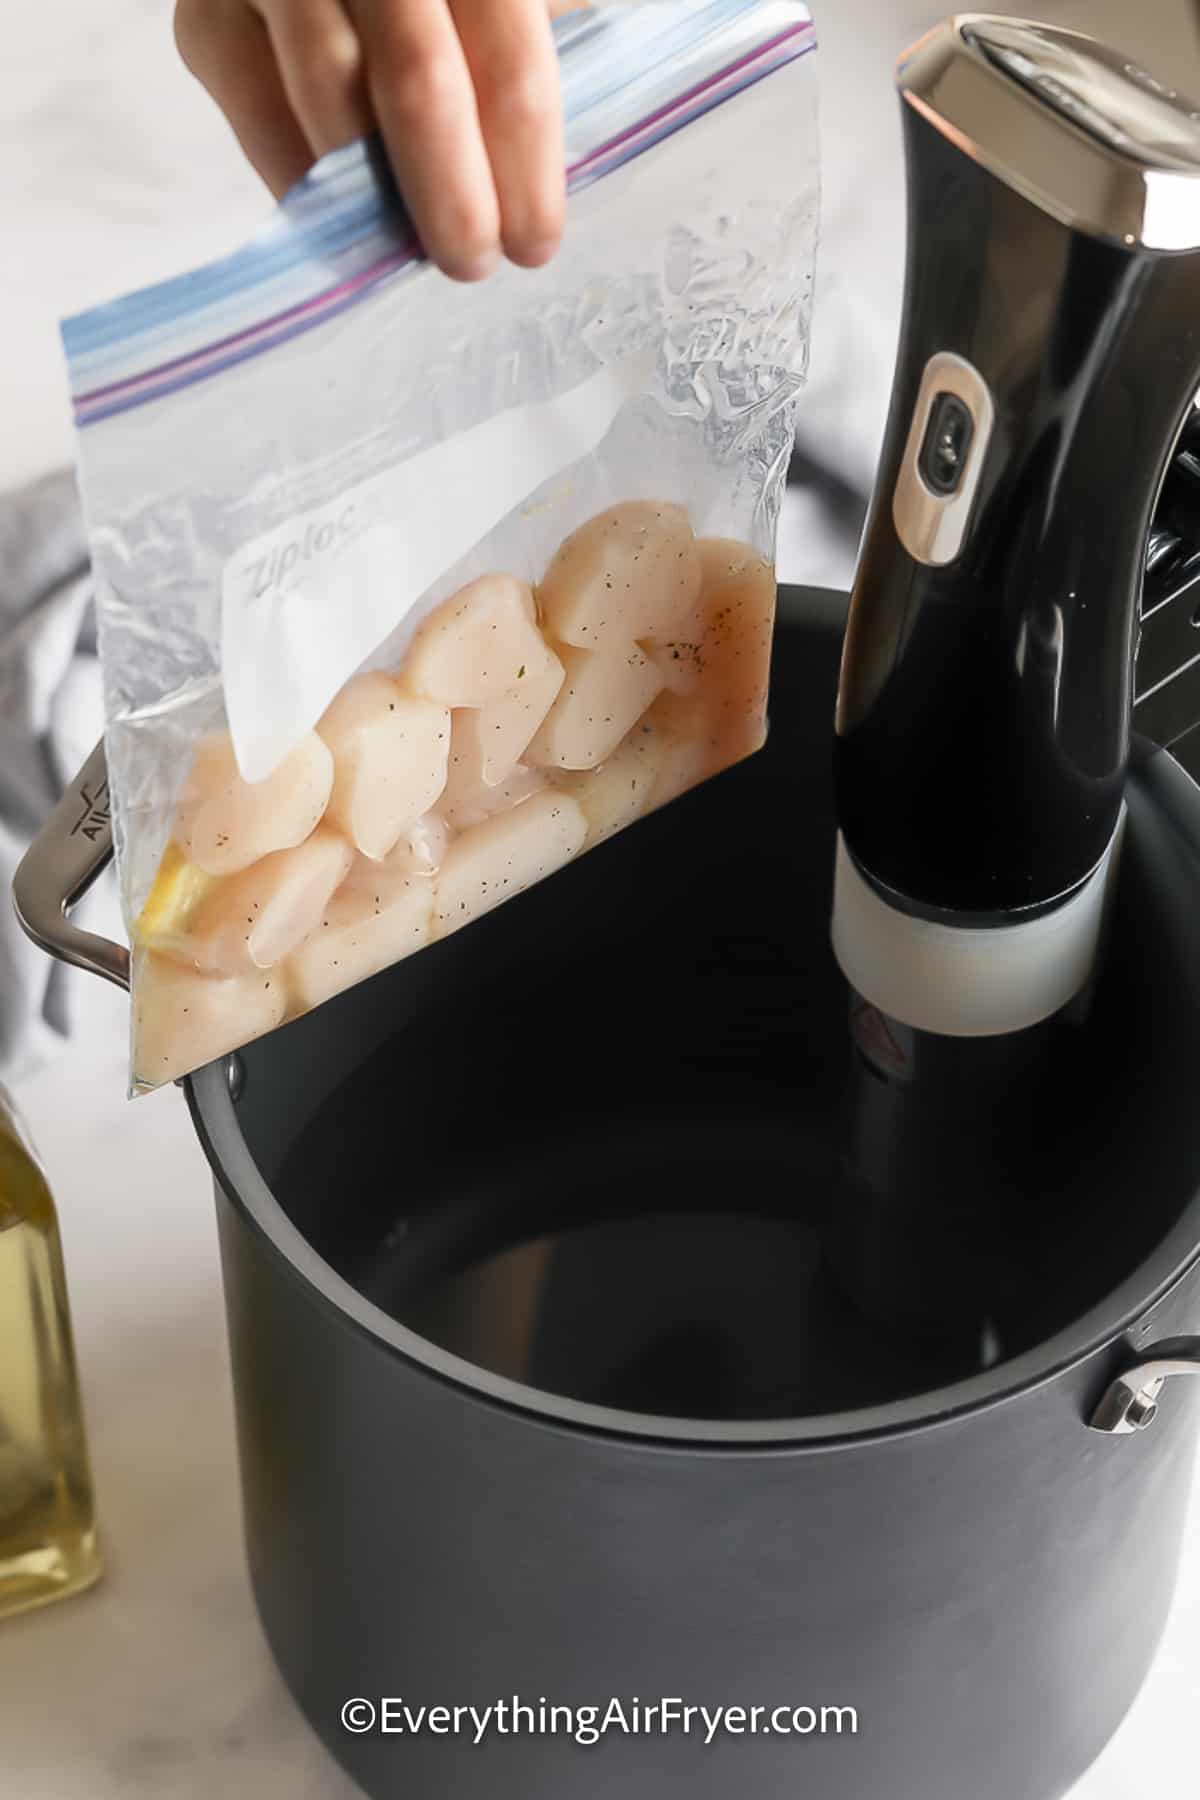 Scallops in a zippered bag being added to the sous vide